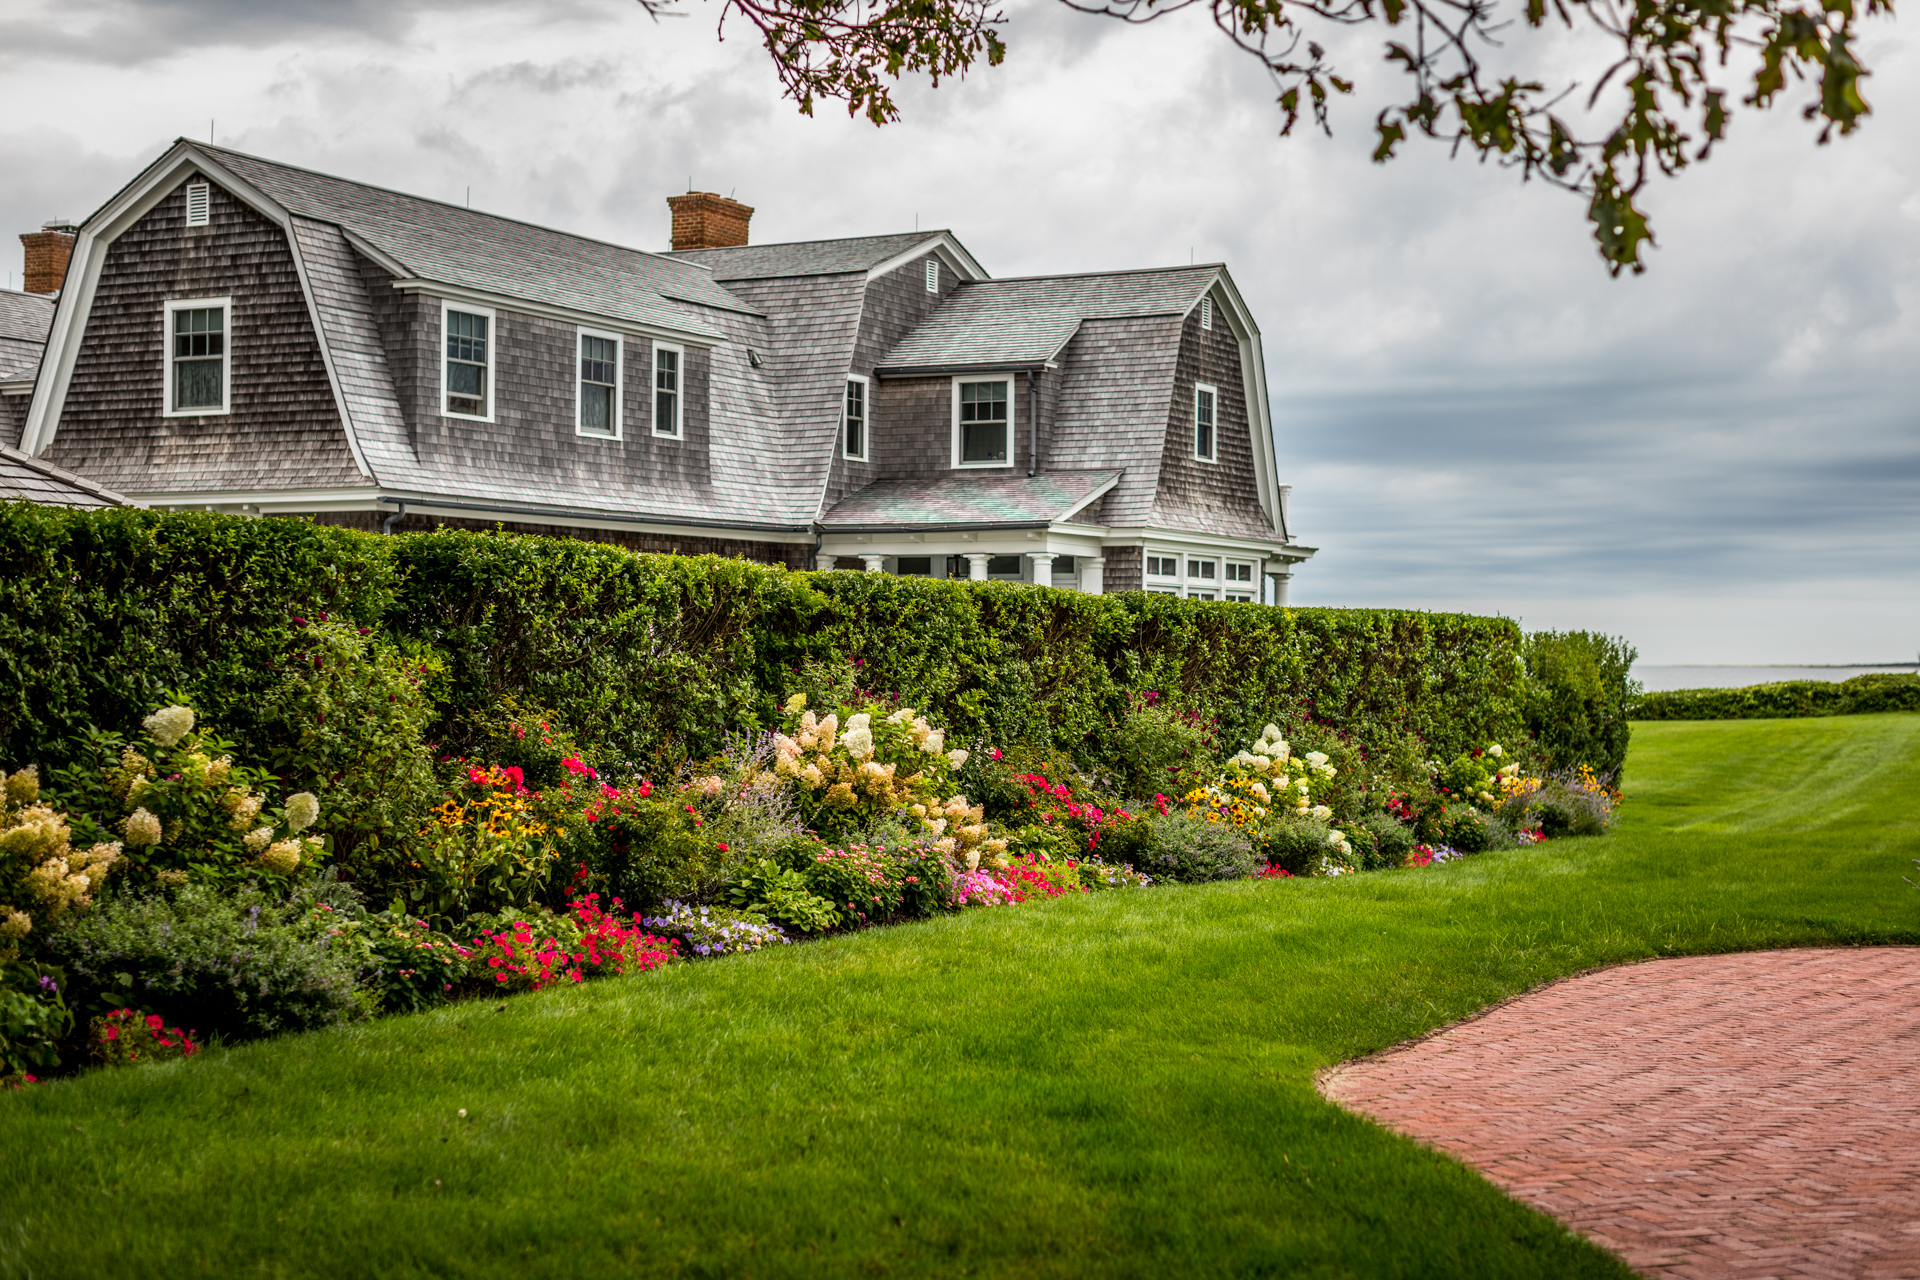 Cottage Garden Ideas | New England life and style | Shannon Shipman